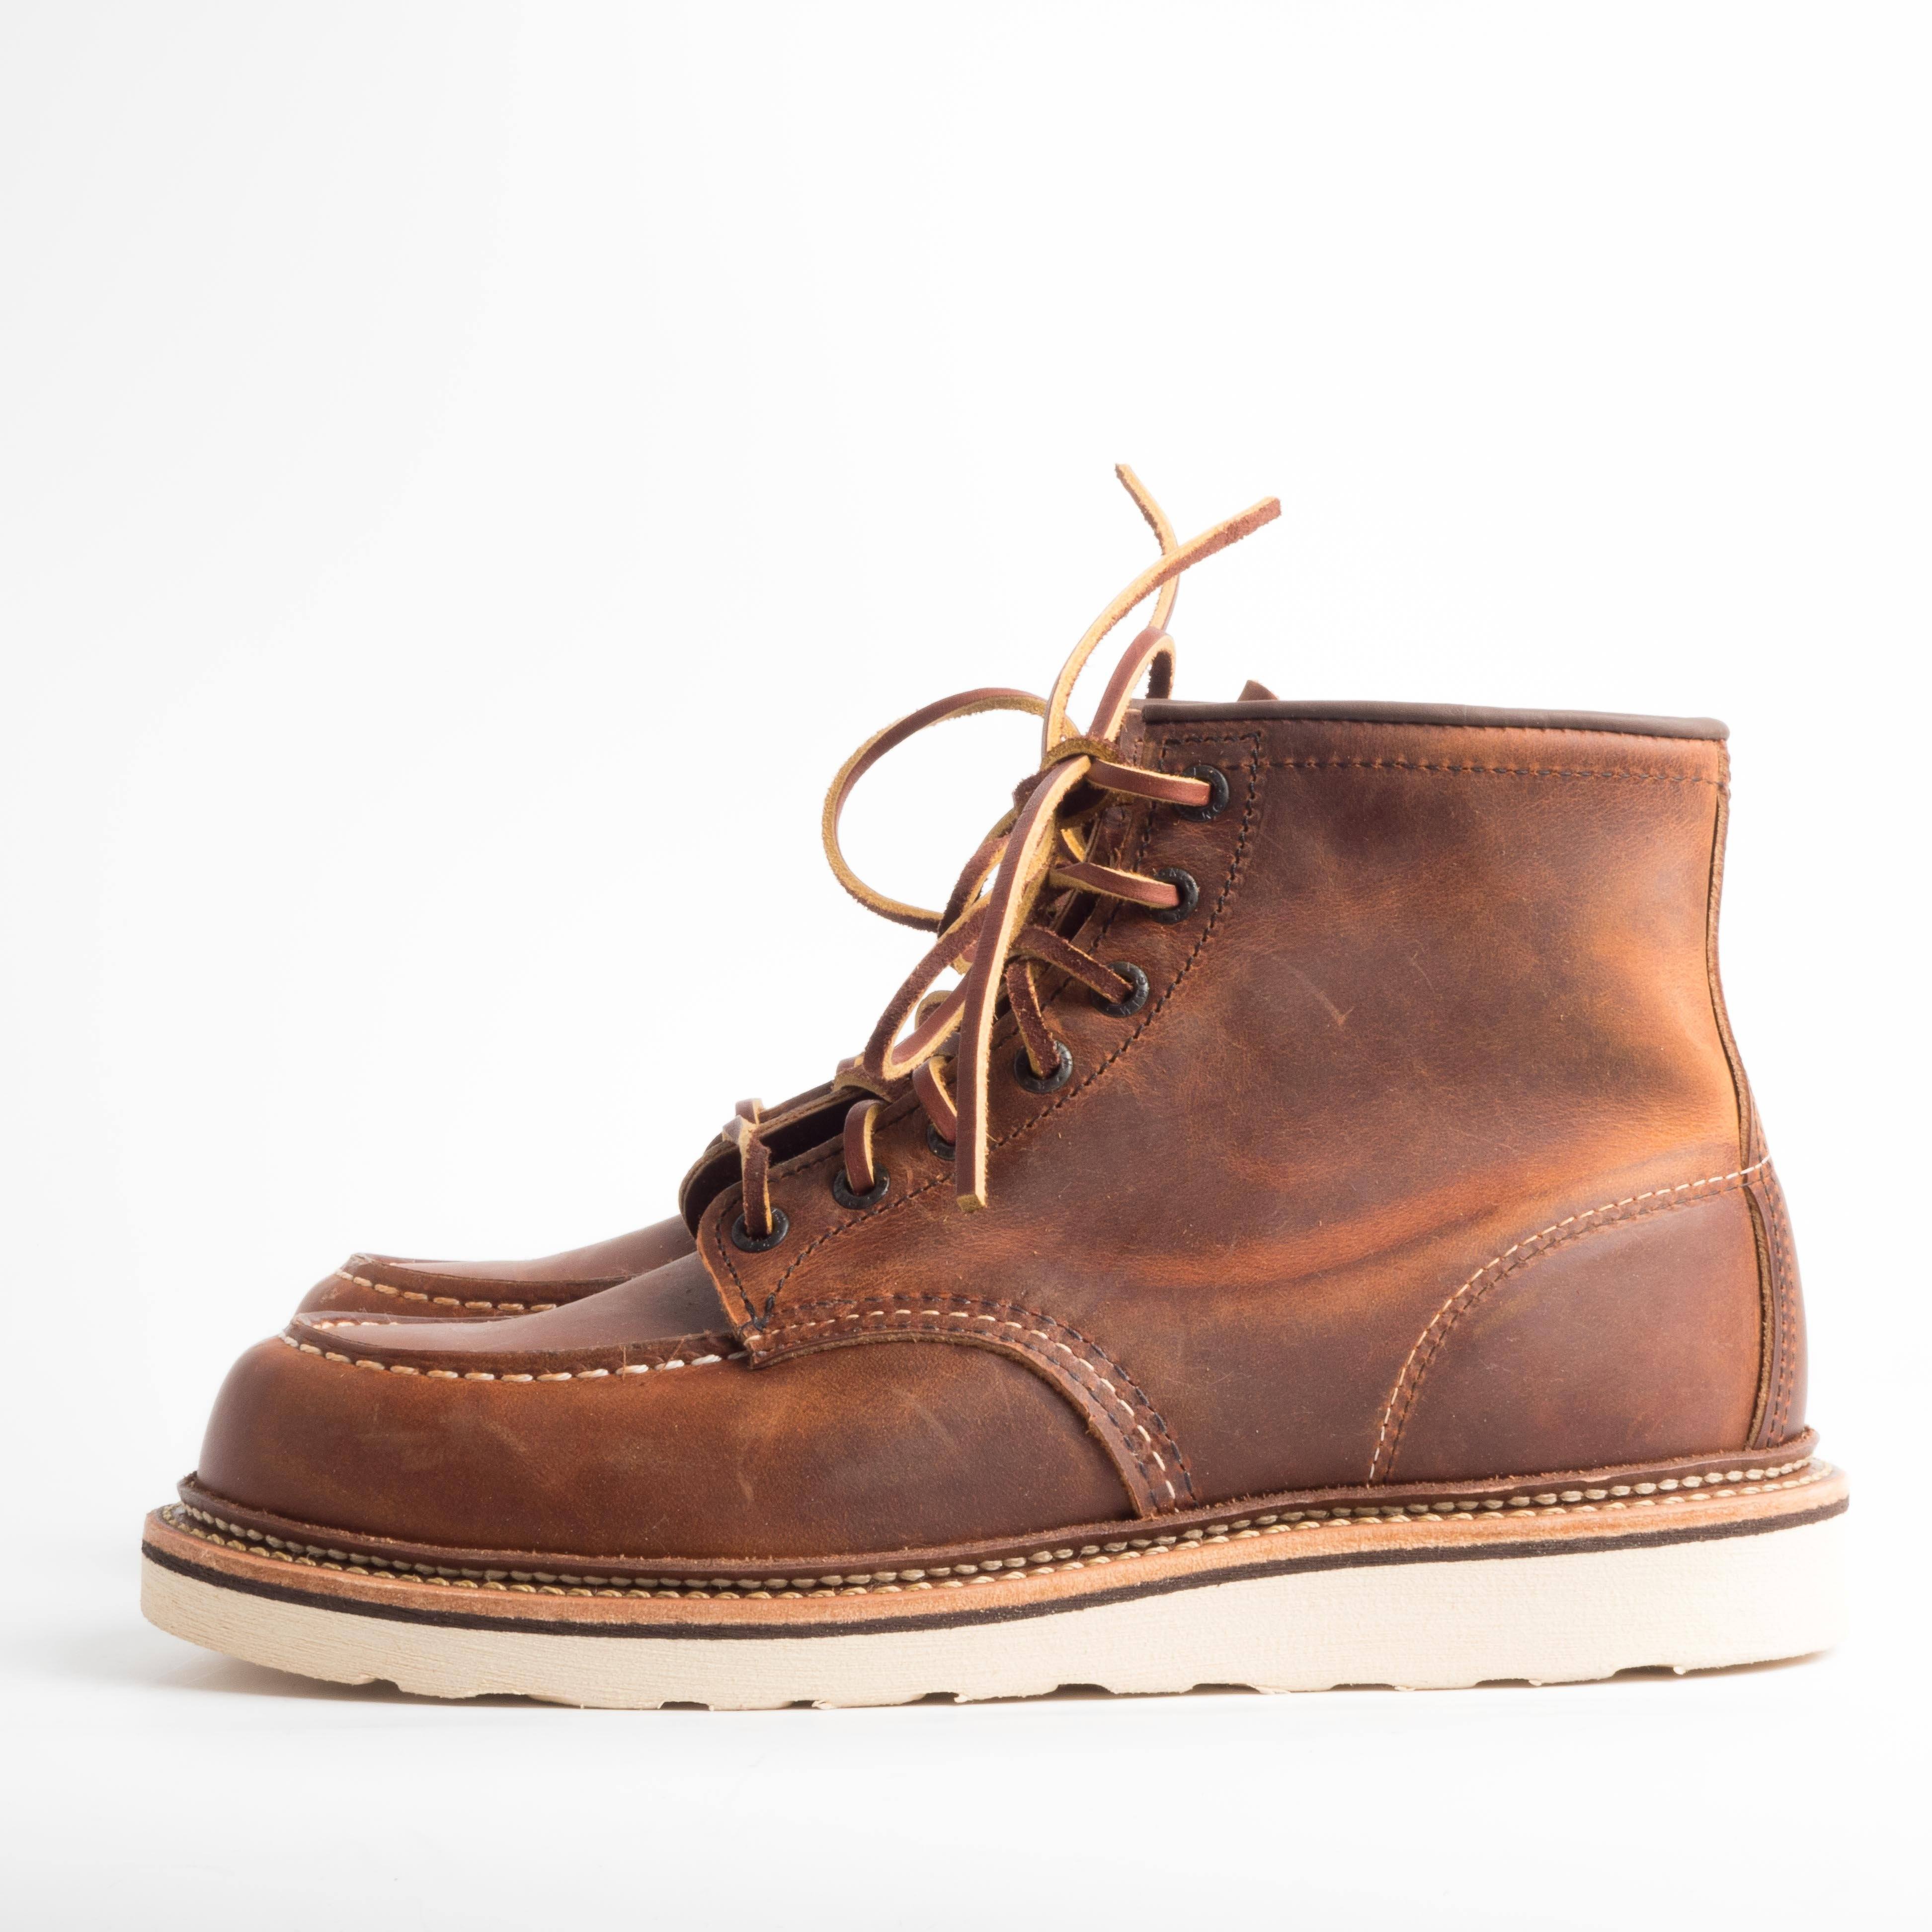 RED WING - AI 2018/19 - Classic Moc Toe 1907 - Copper Scarpe Uomo Red Wing Shoes 